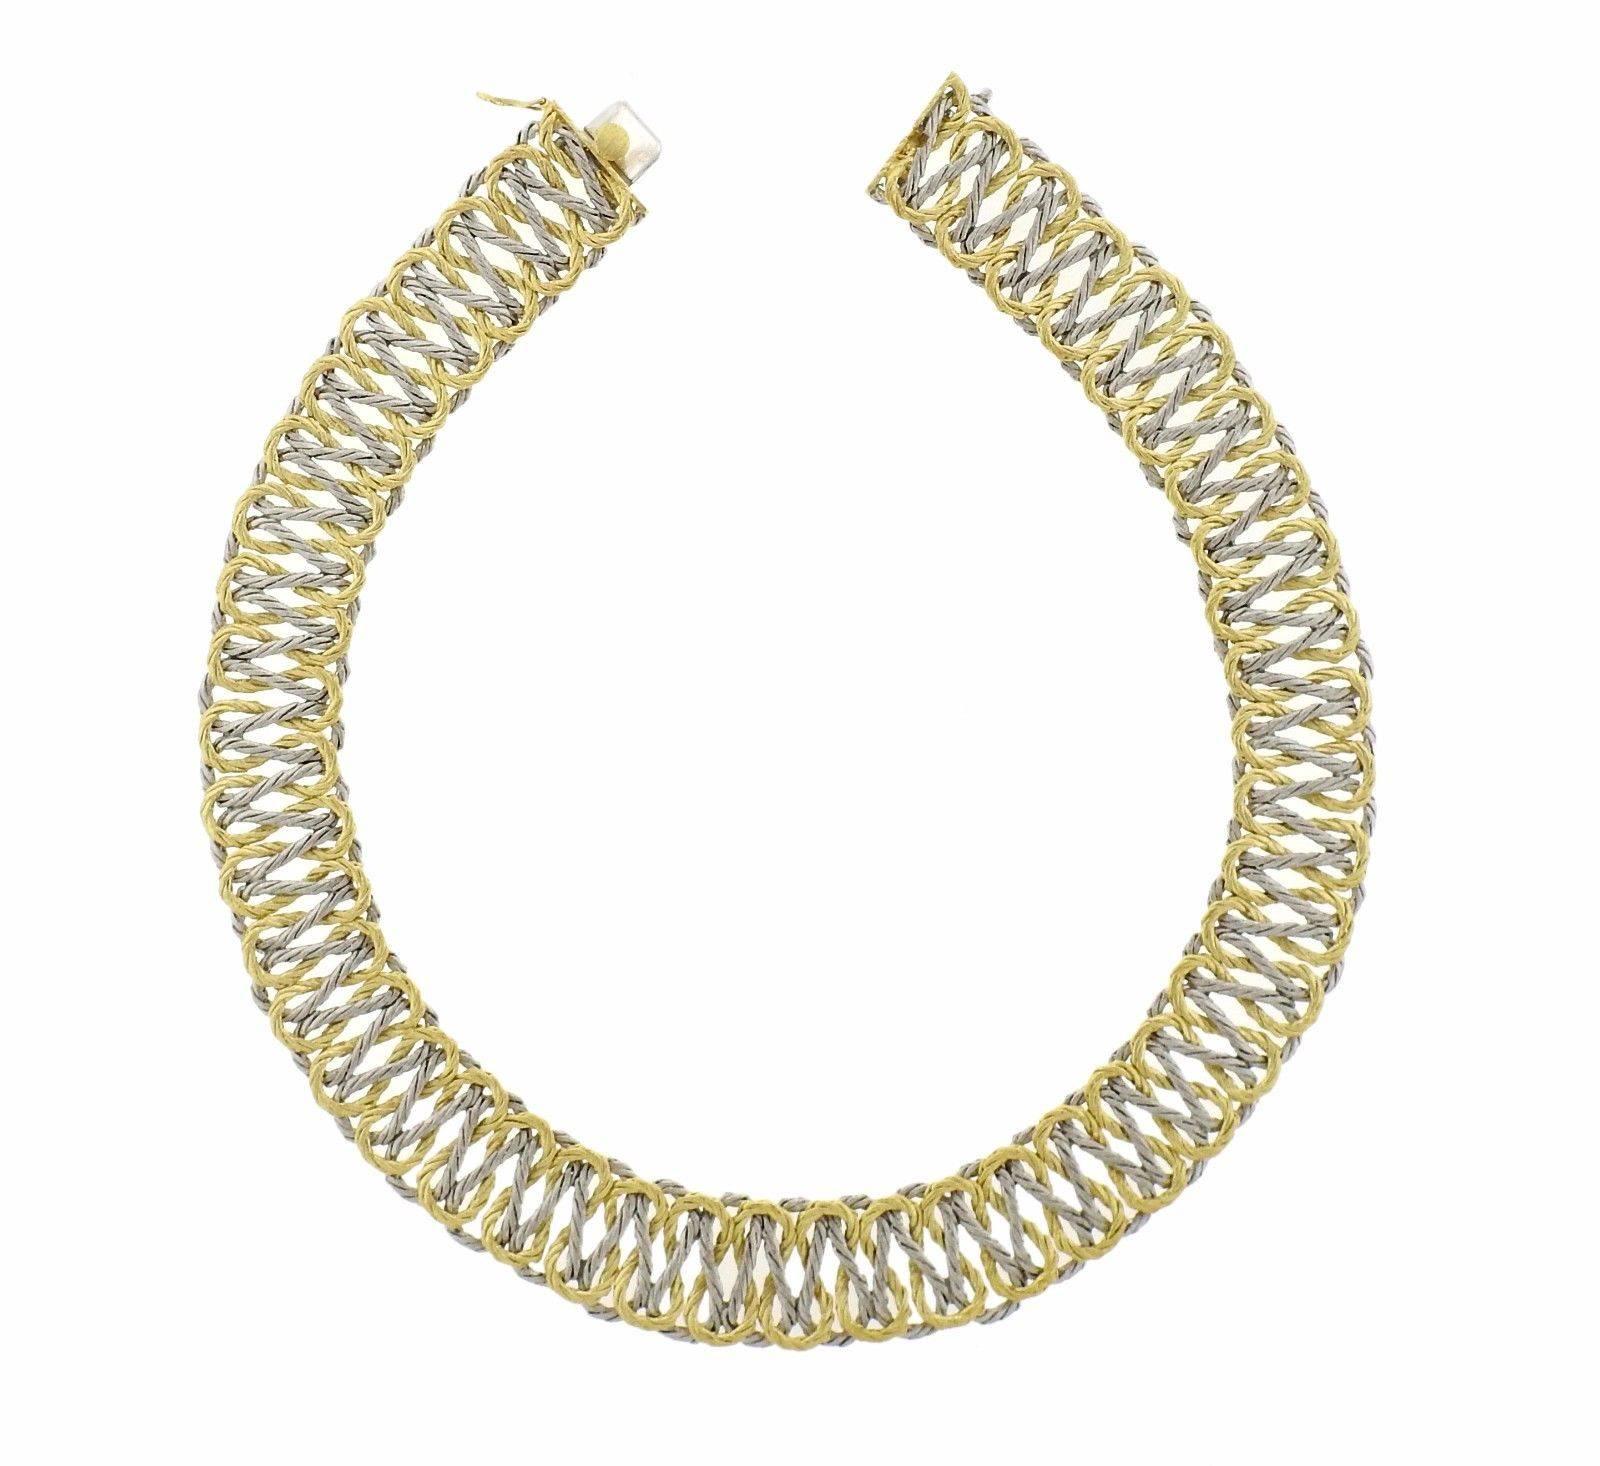 An 18k yellow and white gold necklace in a woven pattern.  The necklace is 15